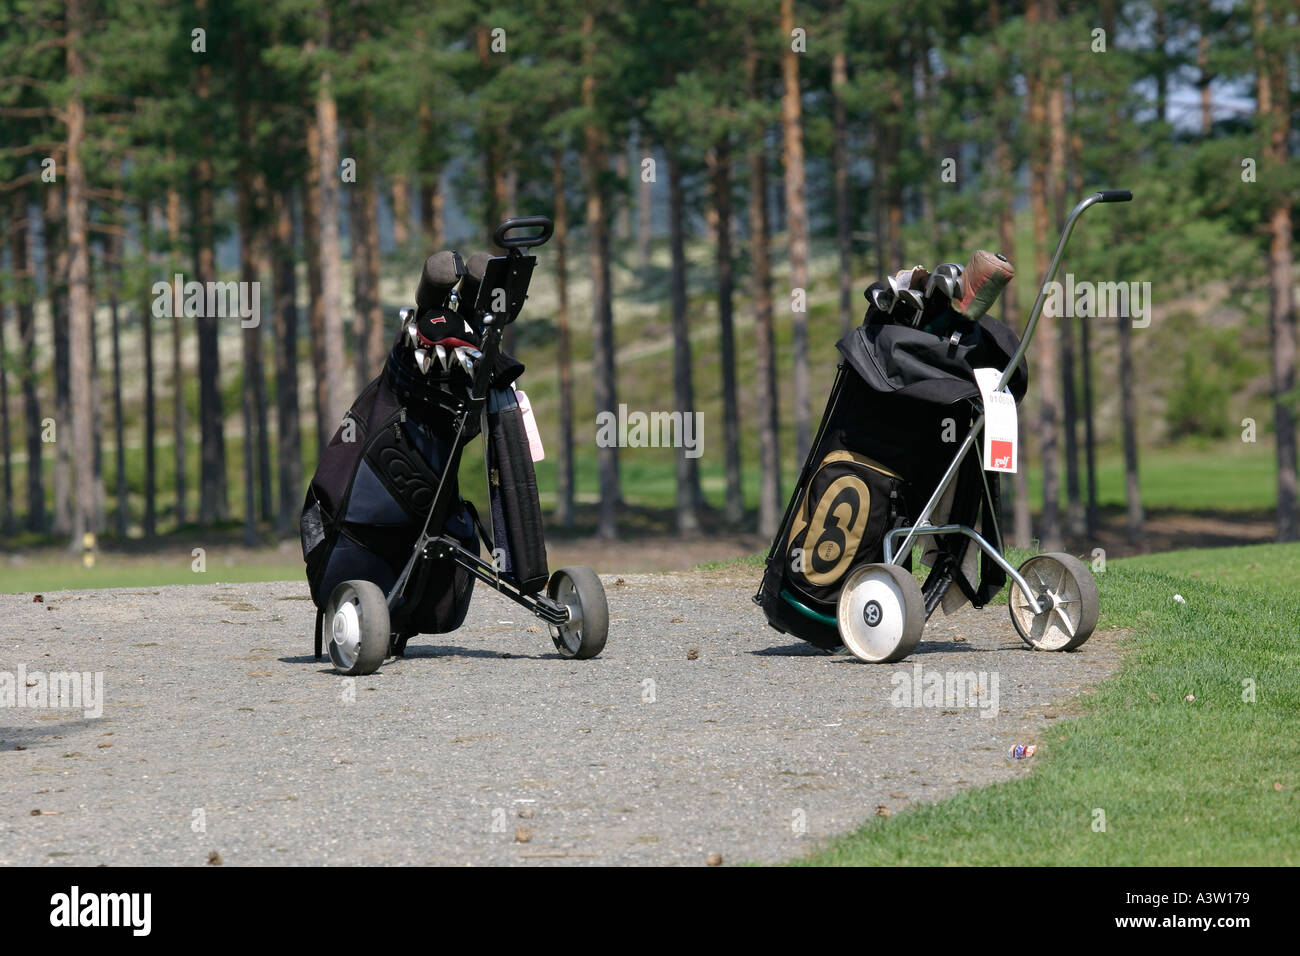 Bags of golf clubs Stock Photo